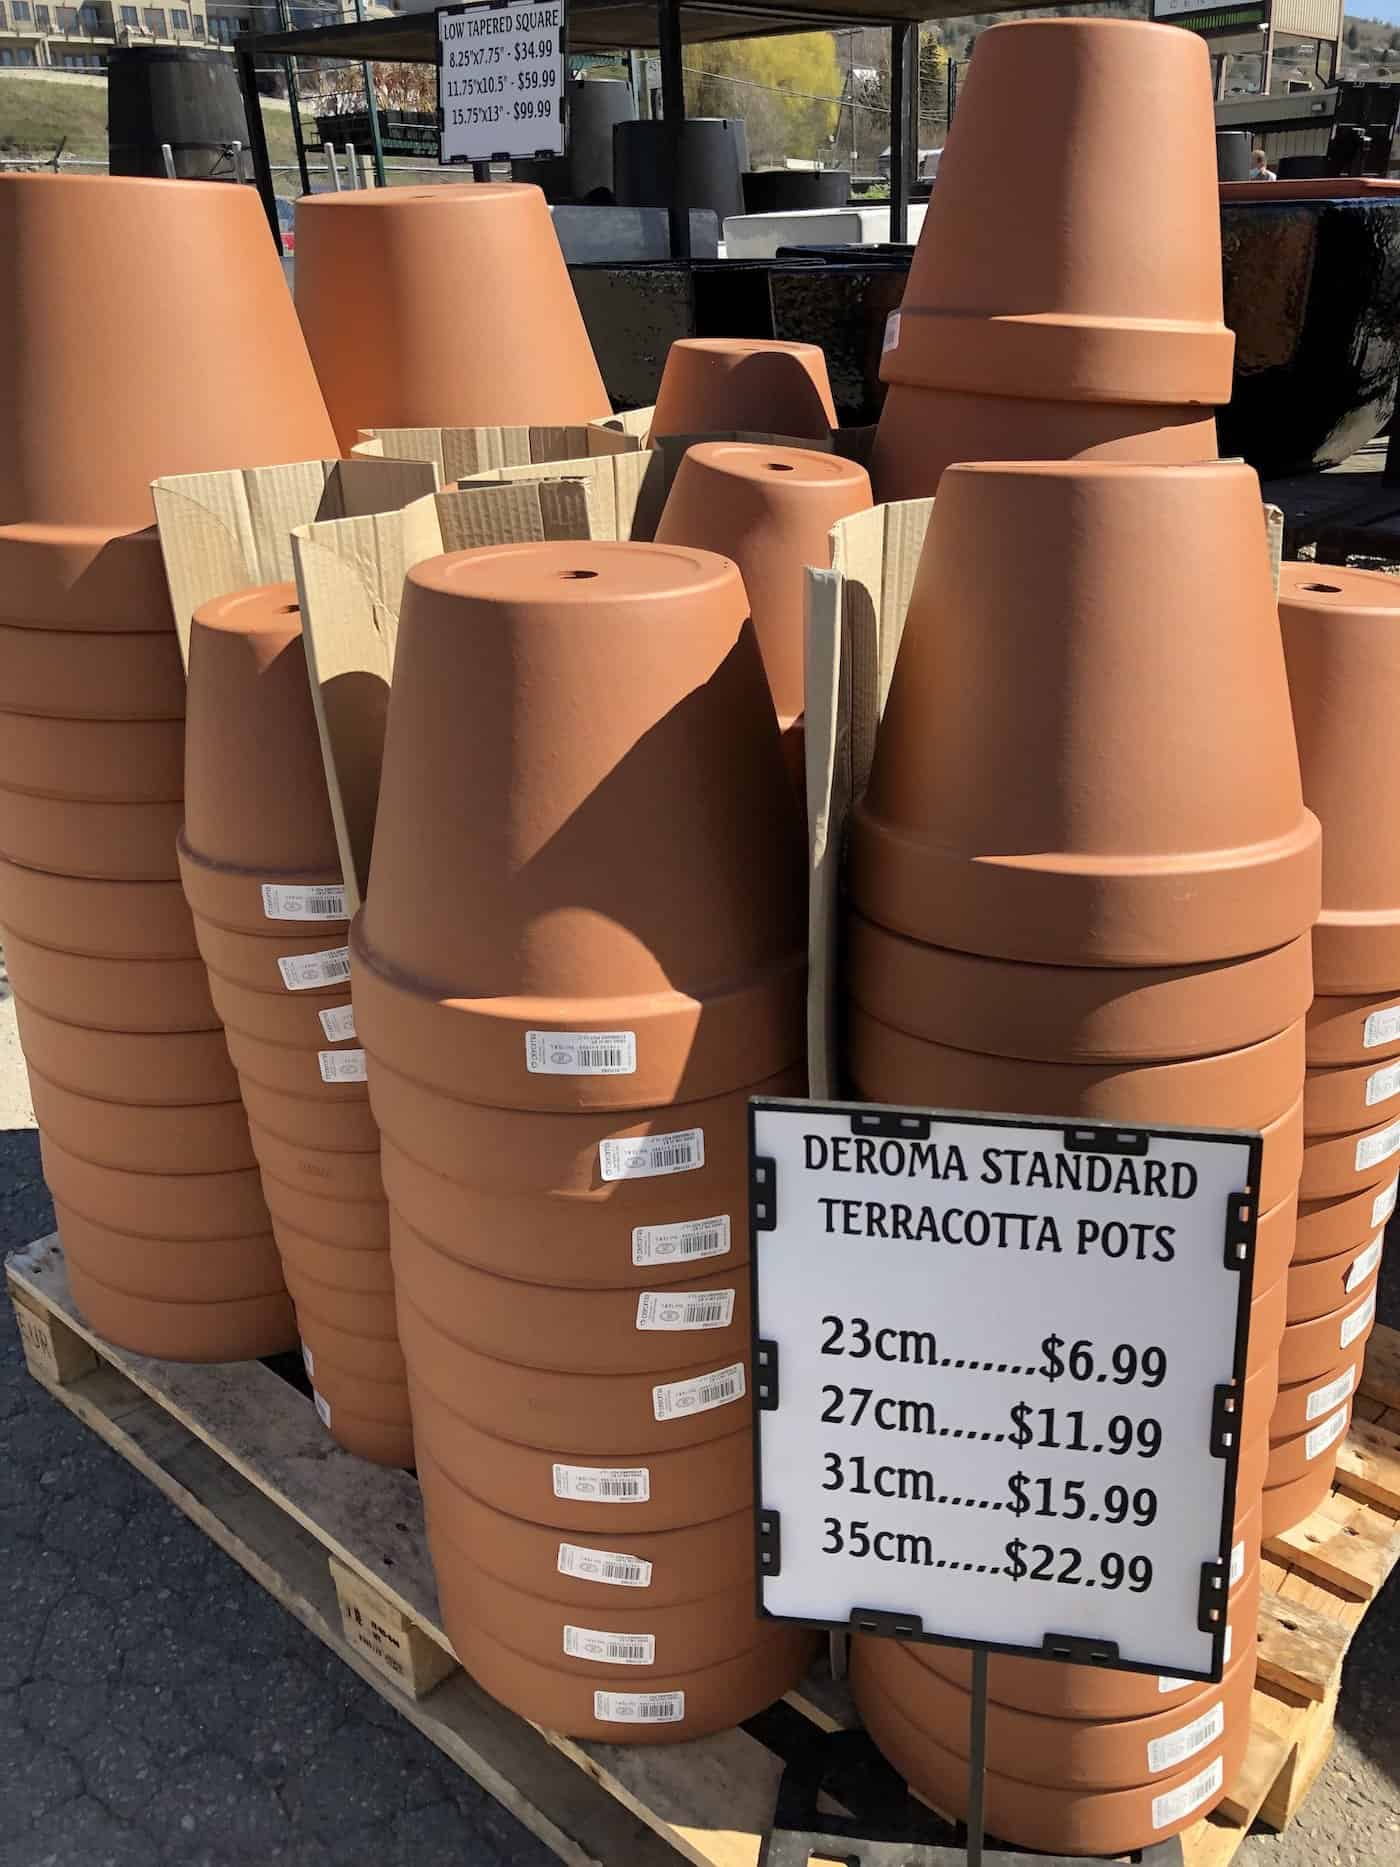 Terra cotta plant pots stacked